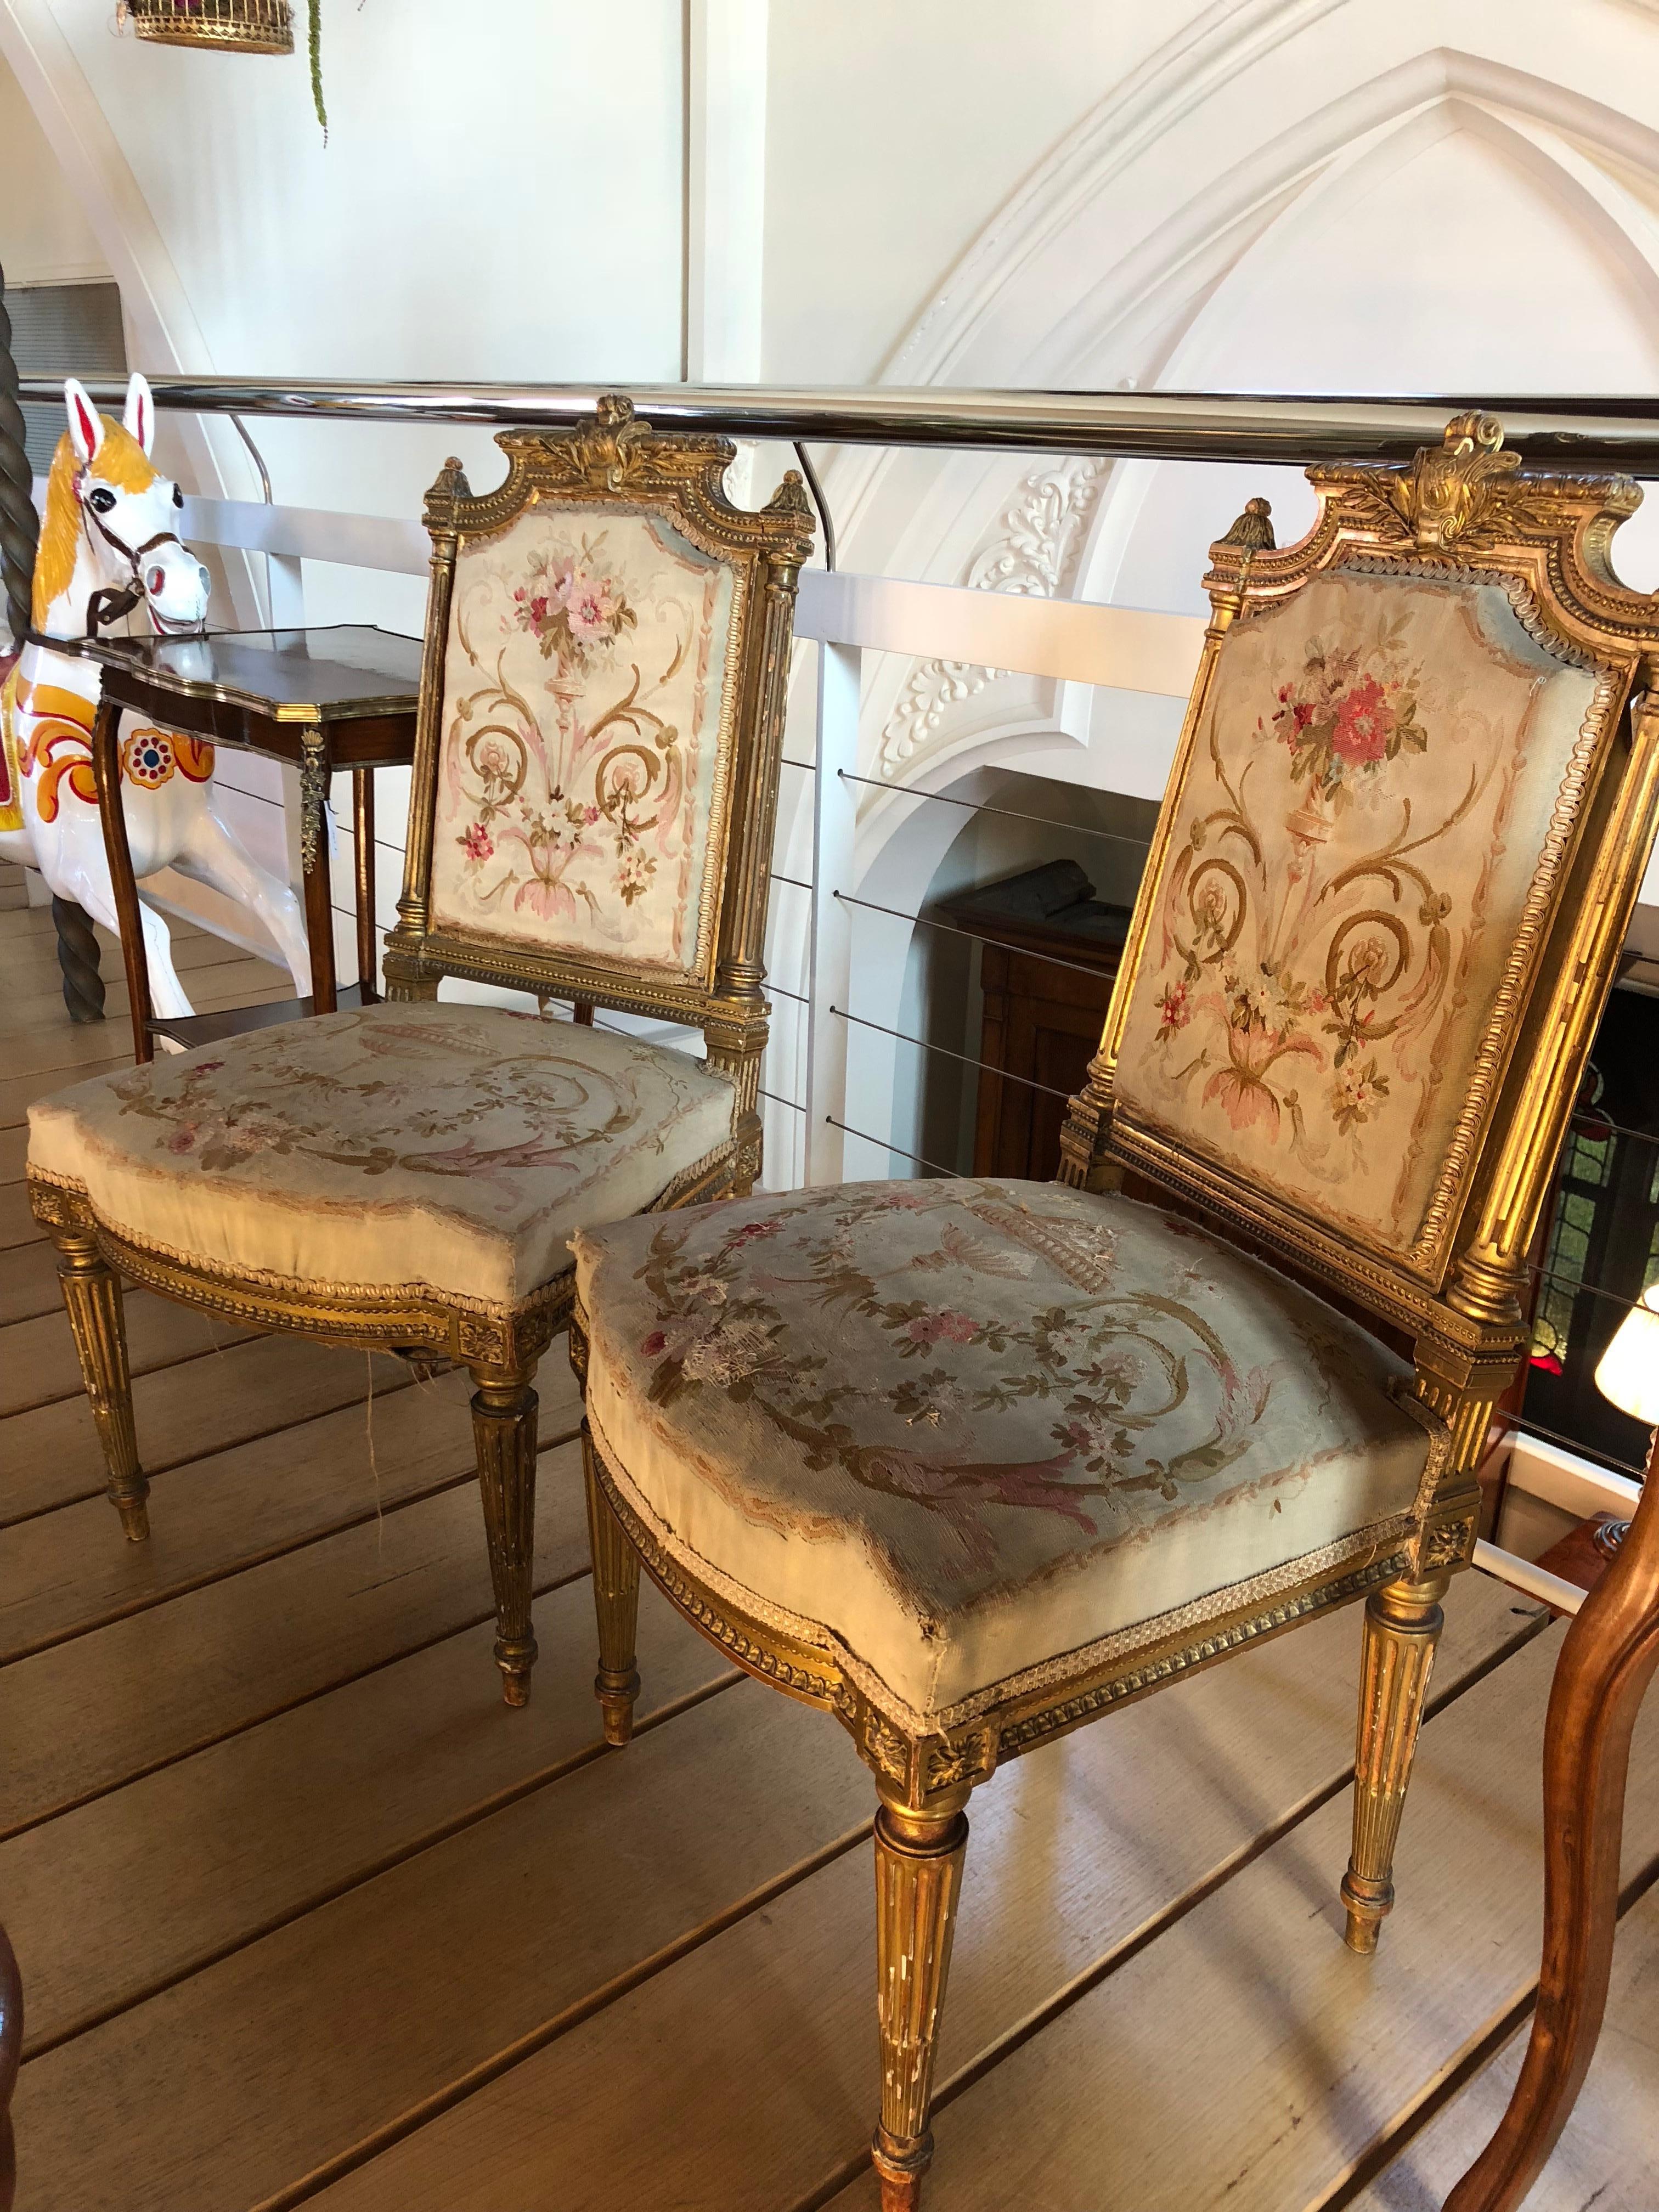 This rare pair of 19th century Aubusson giltwood French chairs feature exquisite original tapestry upholstery, in impeccable antique condition. The iconic Aubusson 'verdure,' scenery on the tapestries feature scrolled fleur and vigne designs, rather